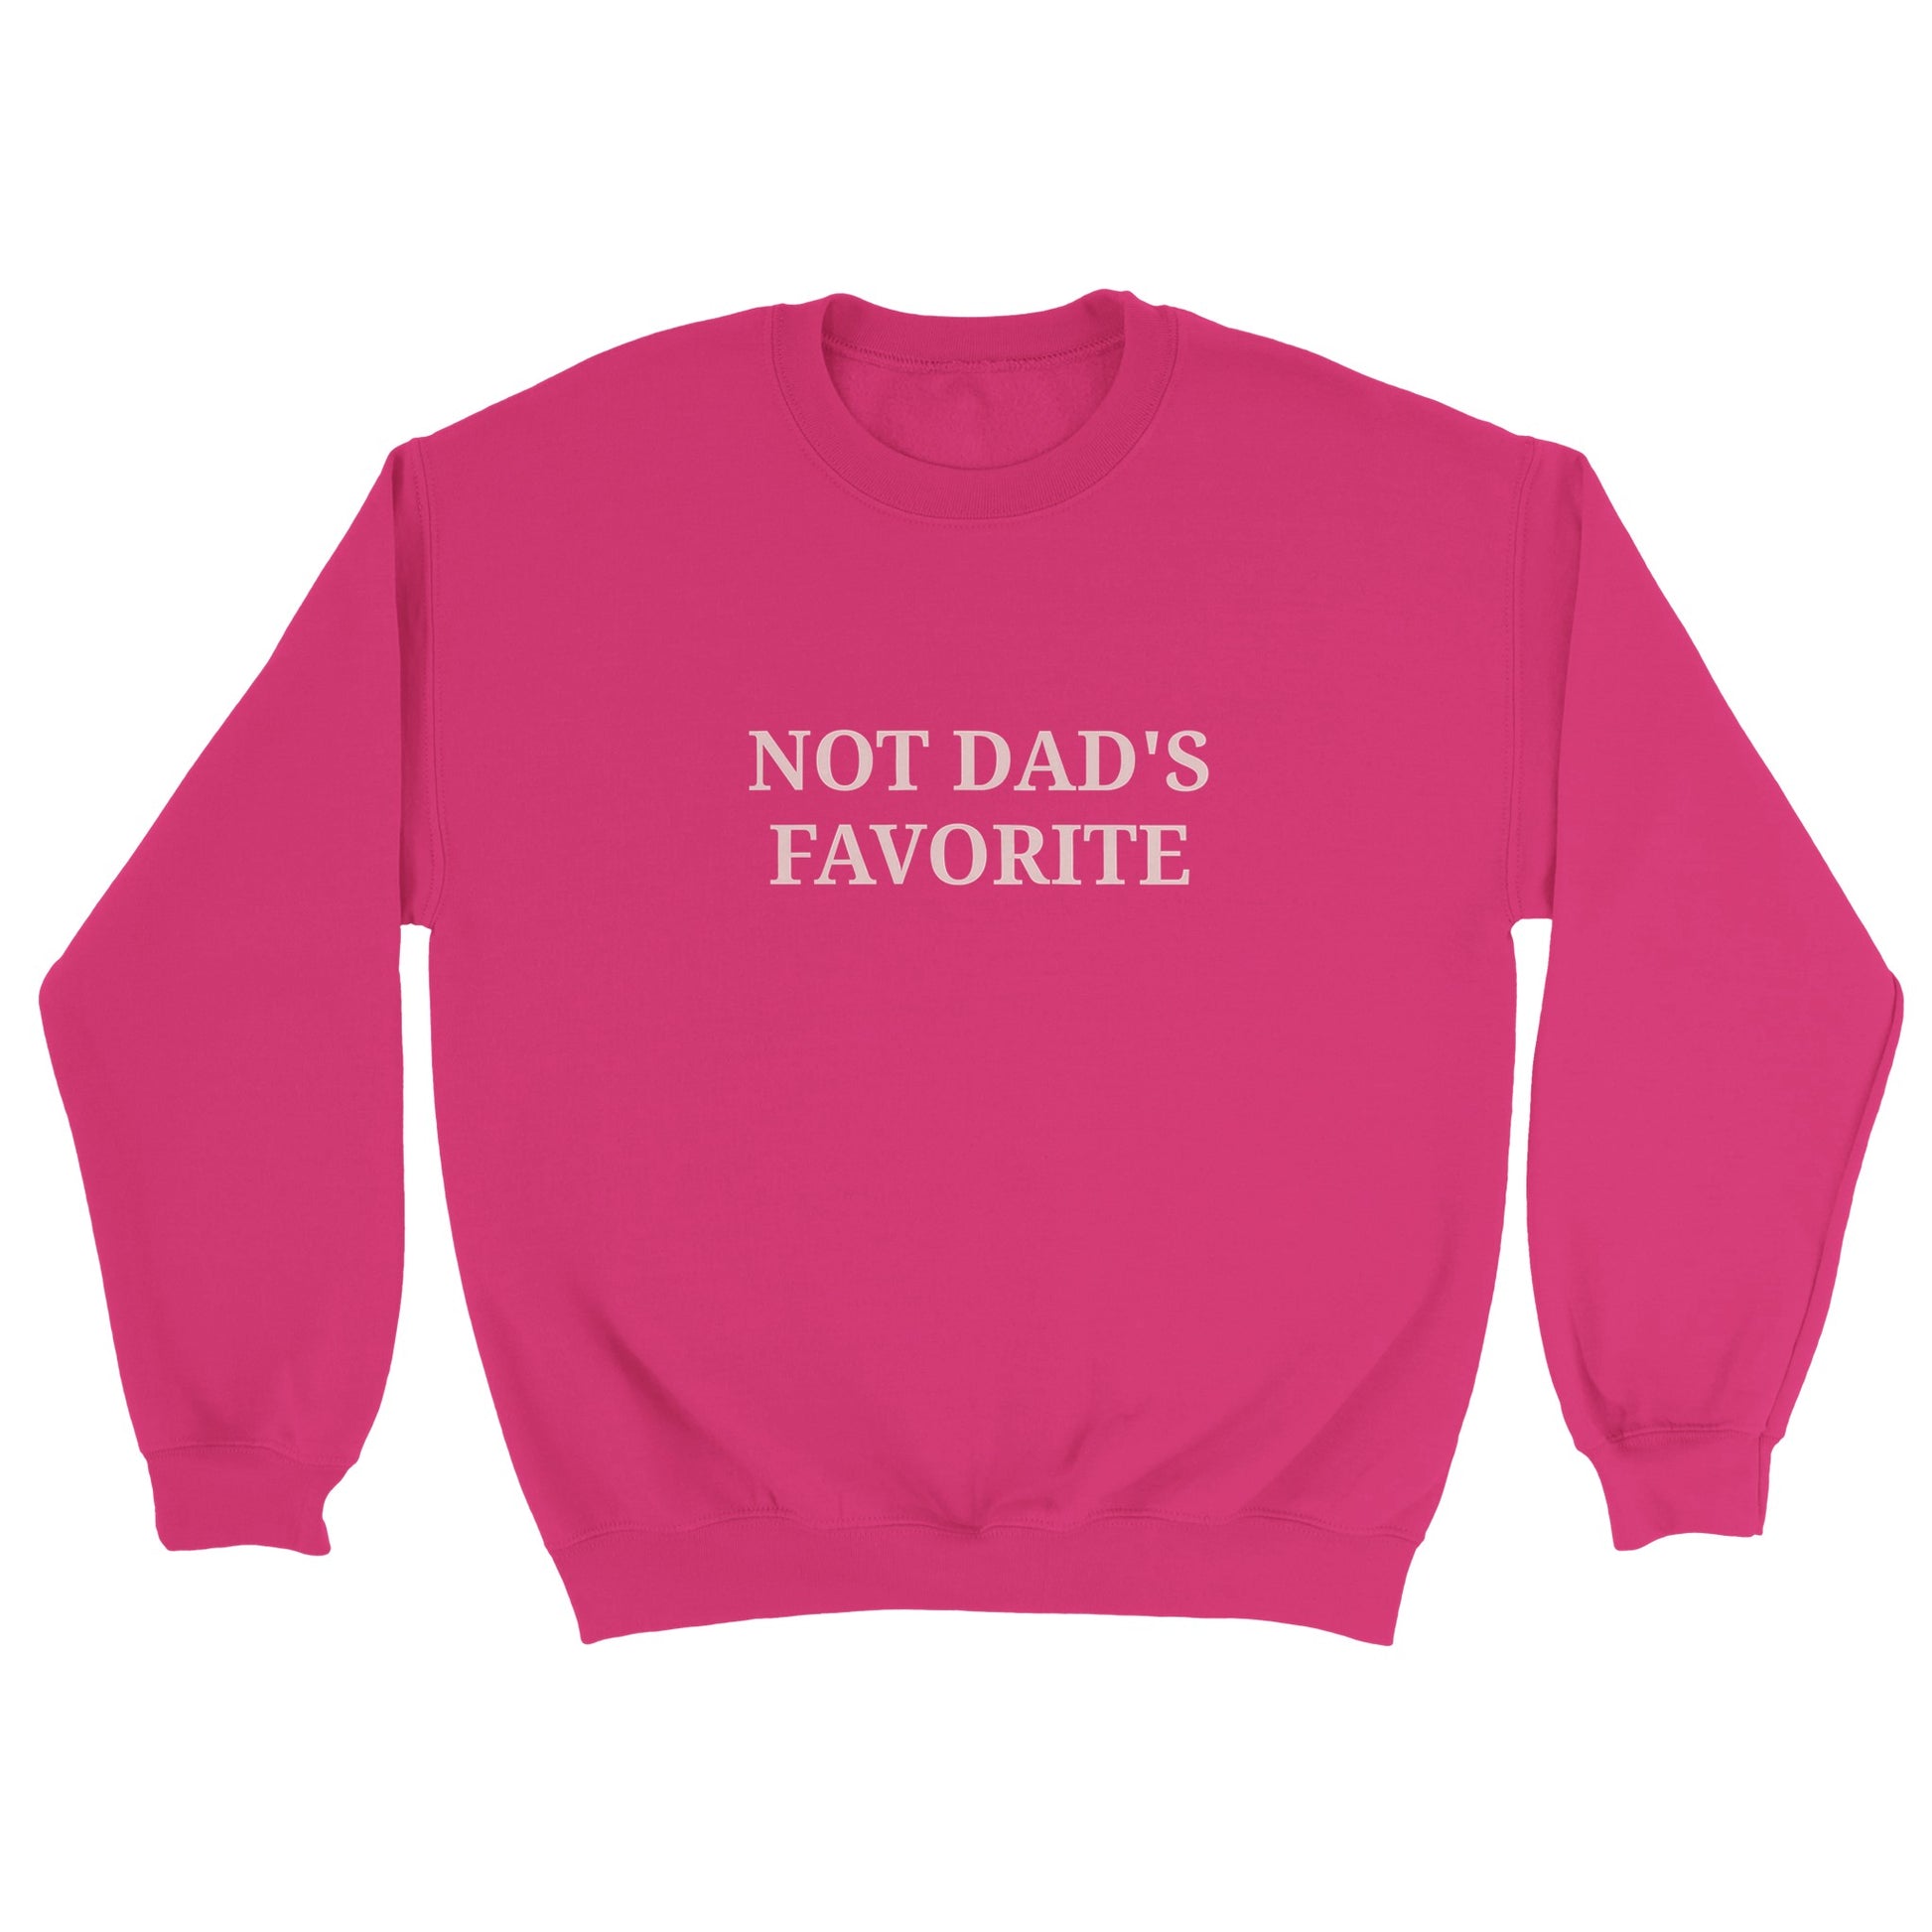 a pink sweatshirt with "Not dad's favorite" written across the chest